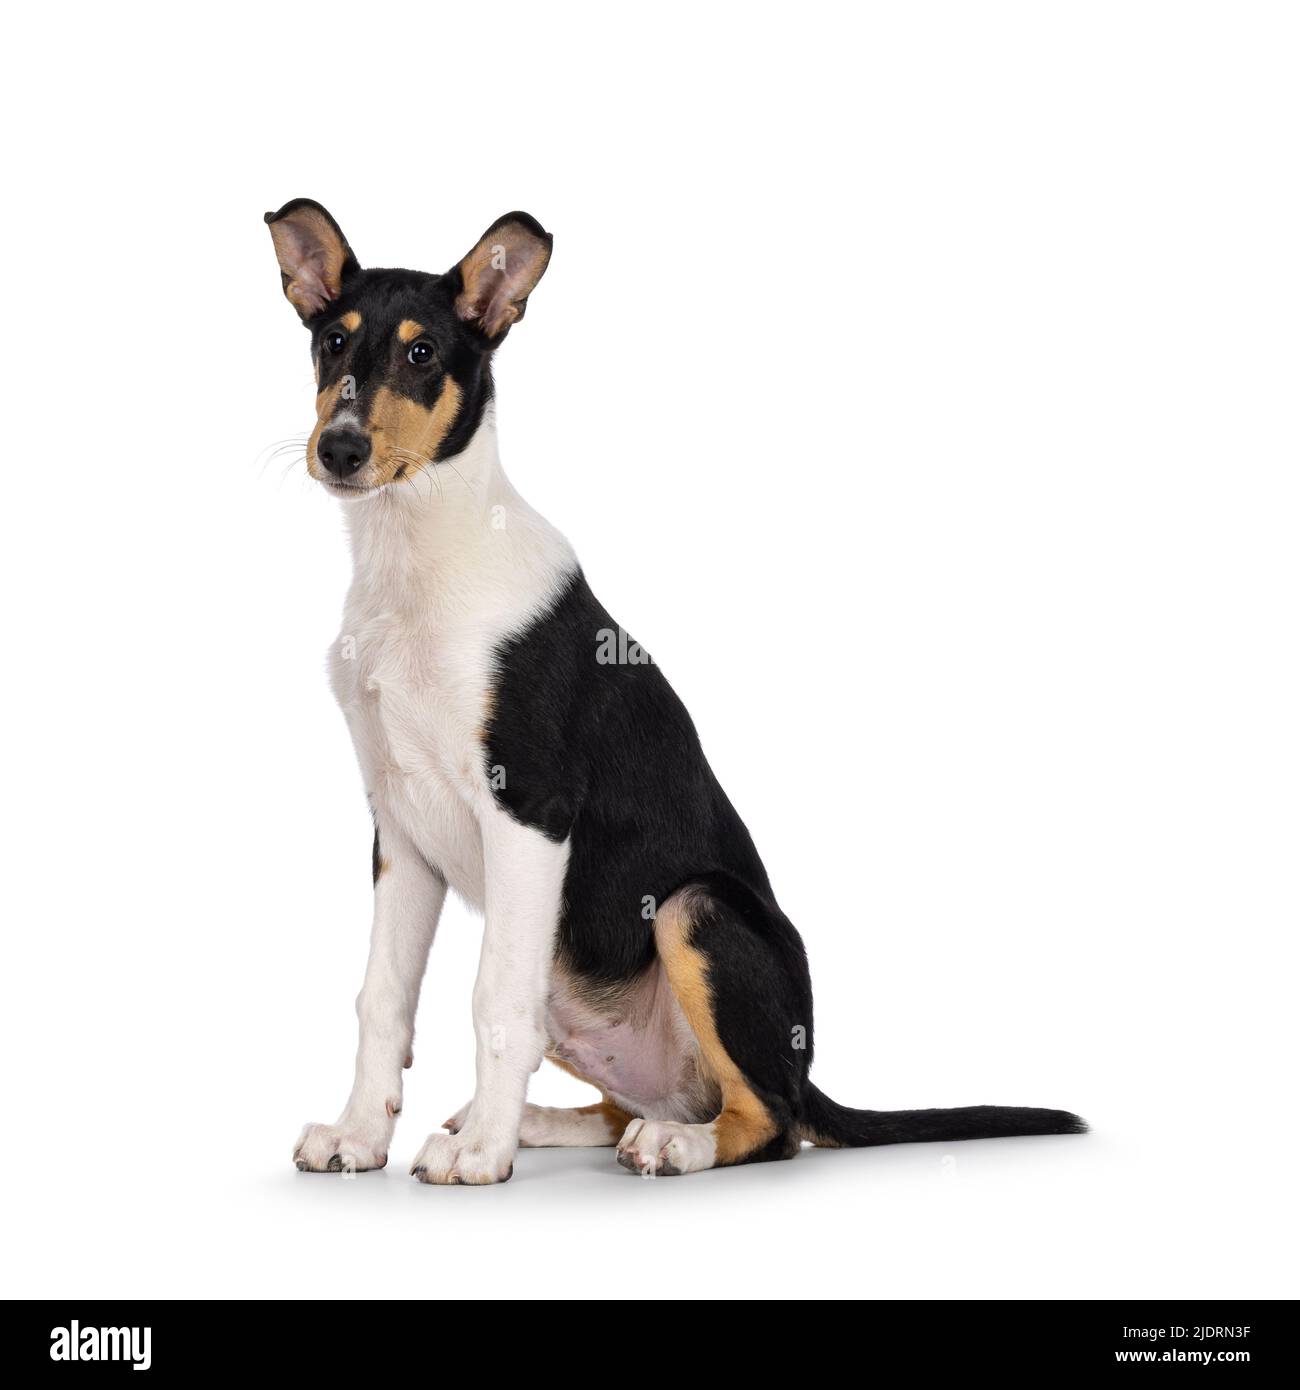 Cute young Smooth Collie dog, sitting up side ways. Looking towards camera. Isolated on a white background. Stock Photo